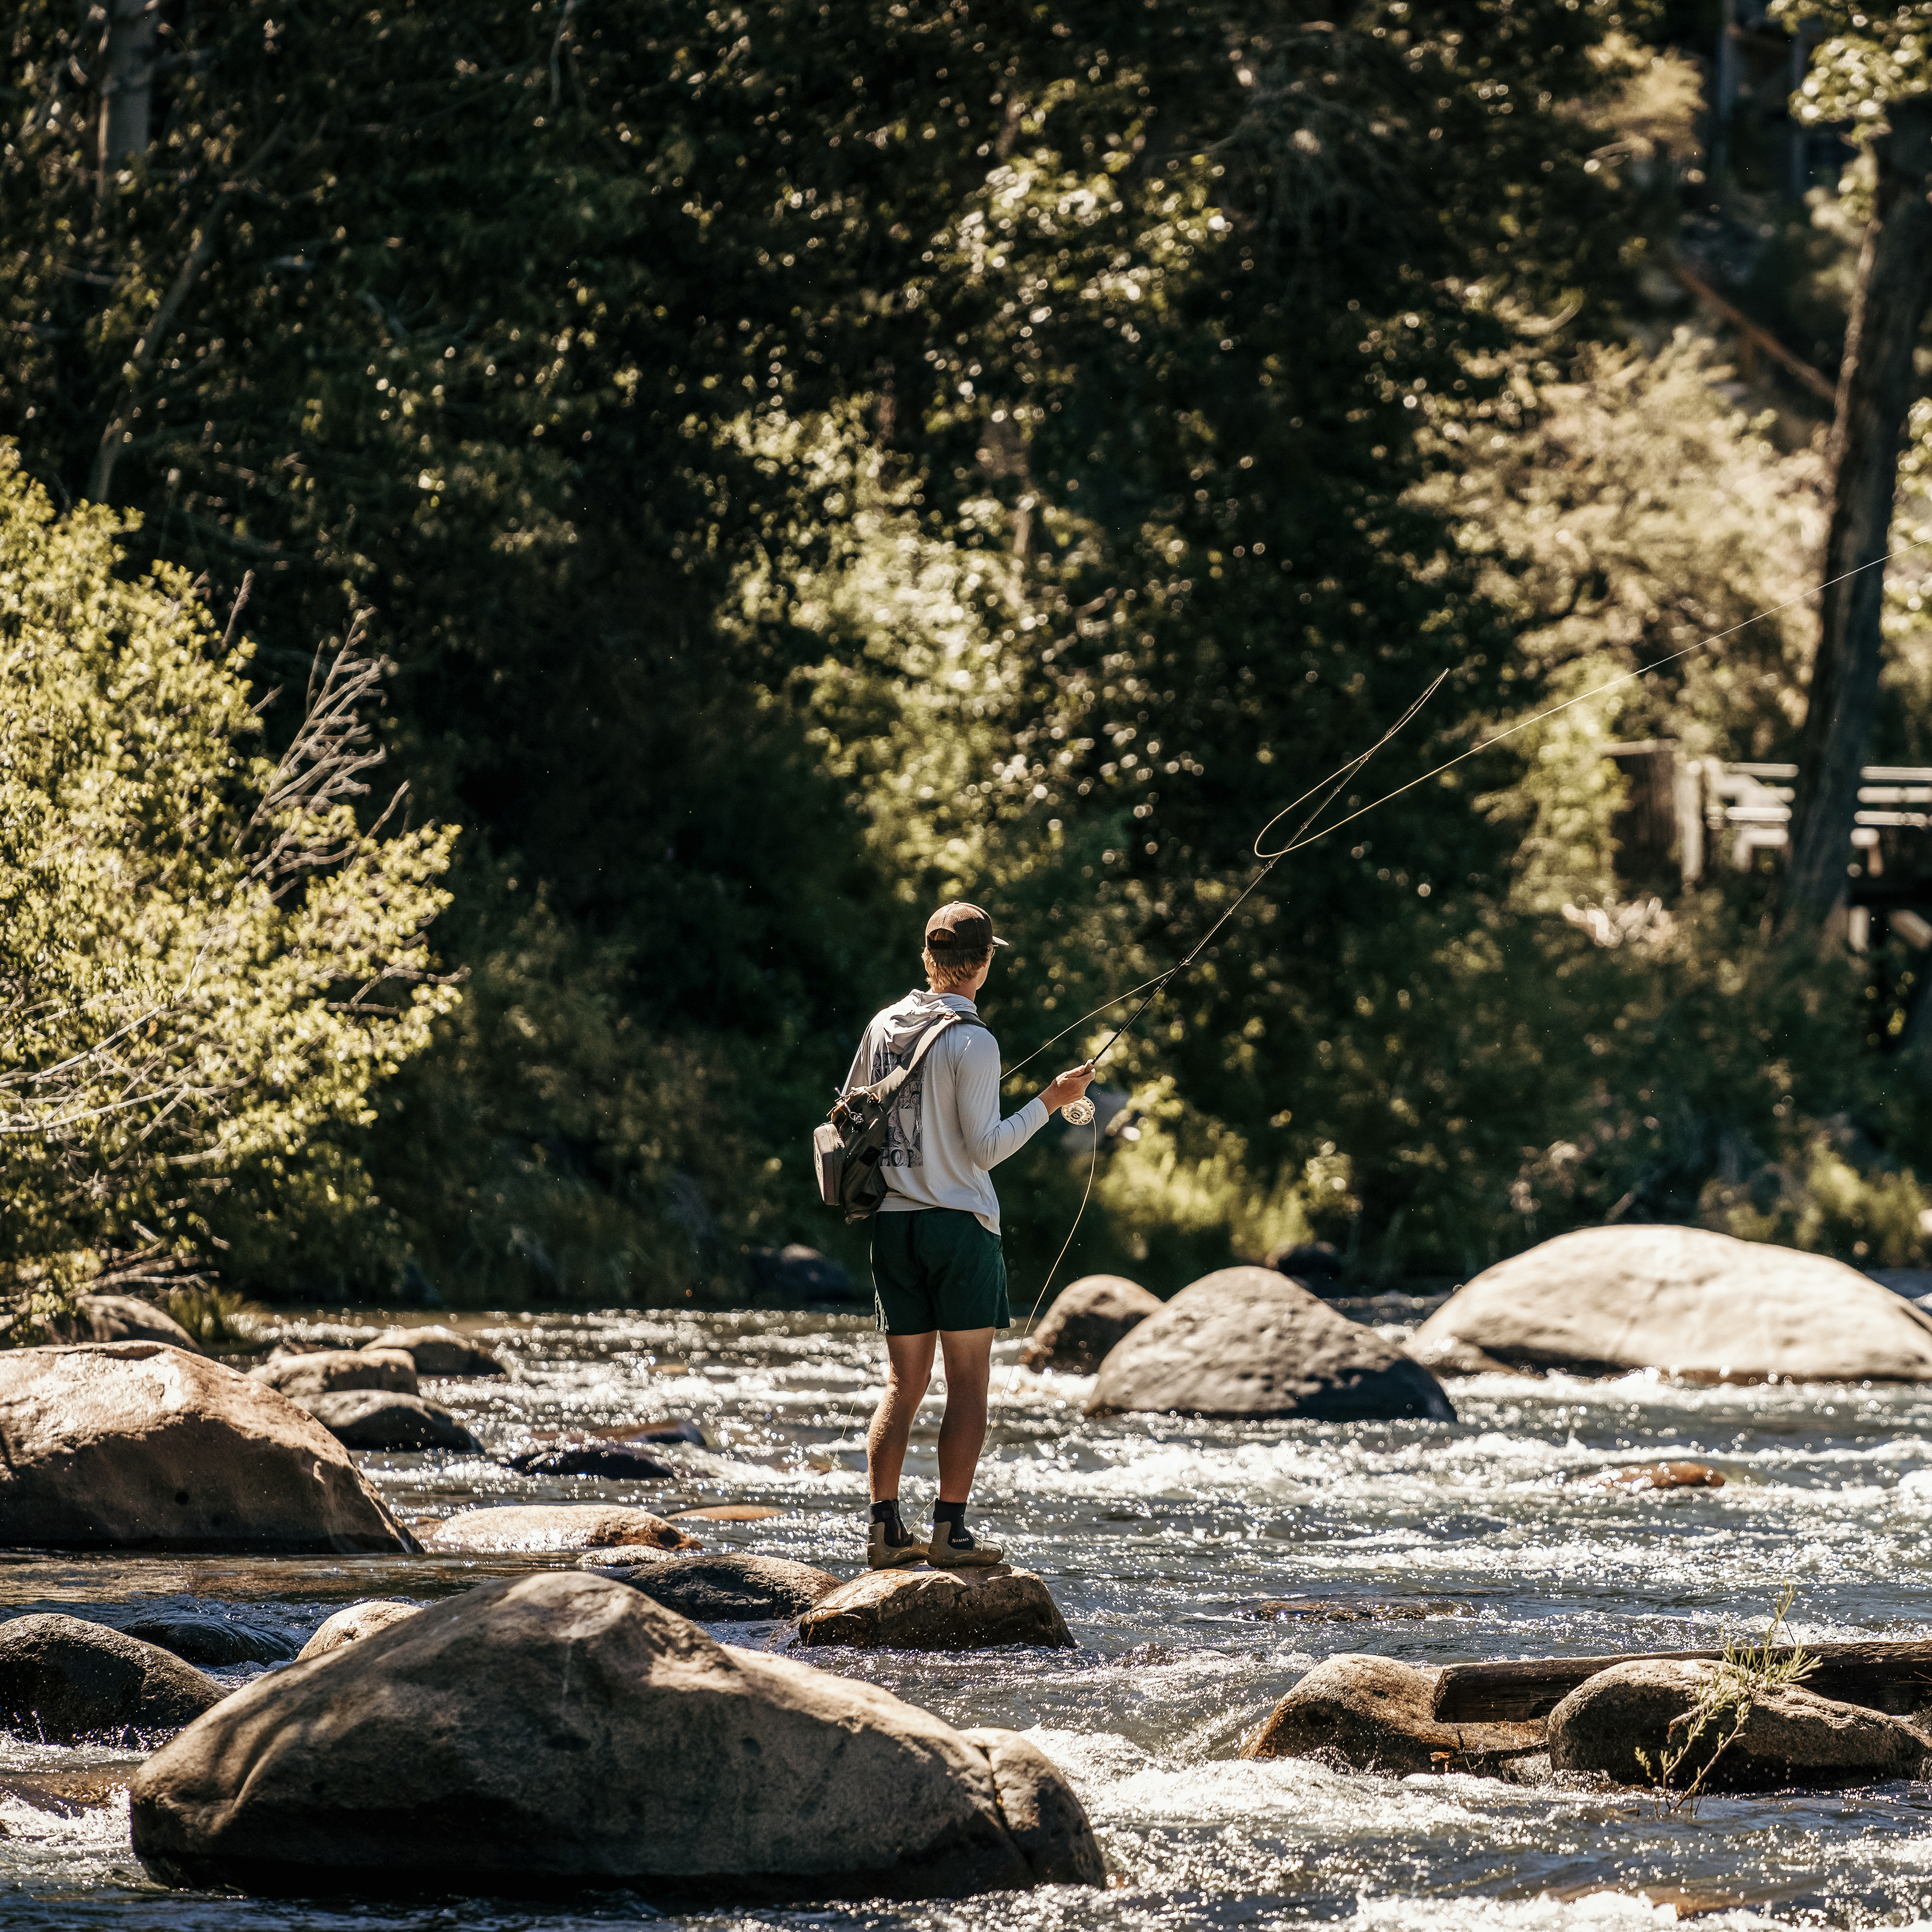 person fly fishing in river